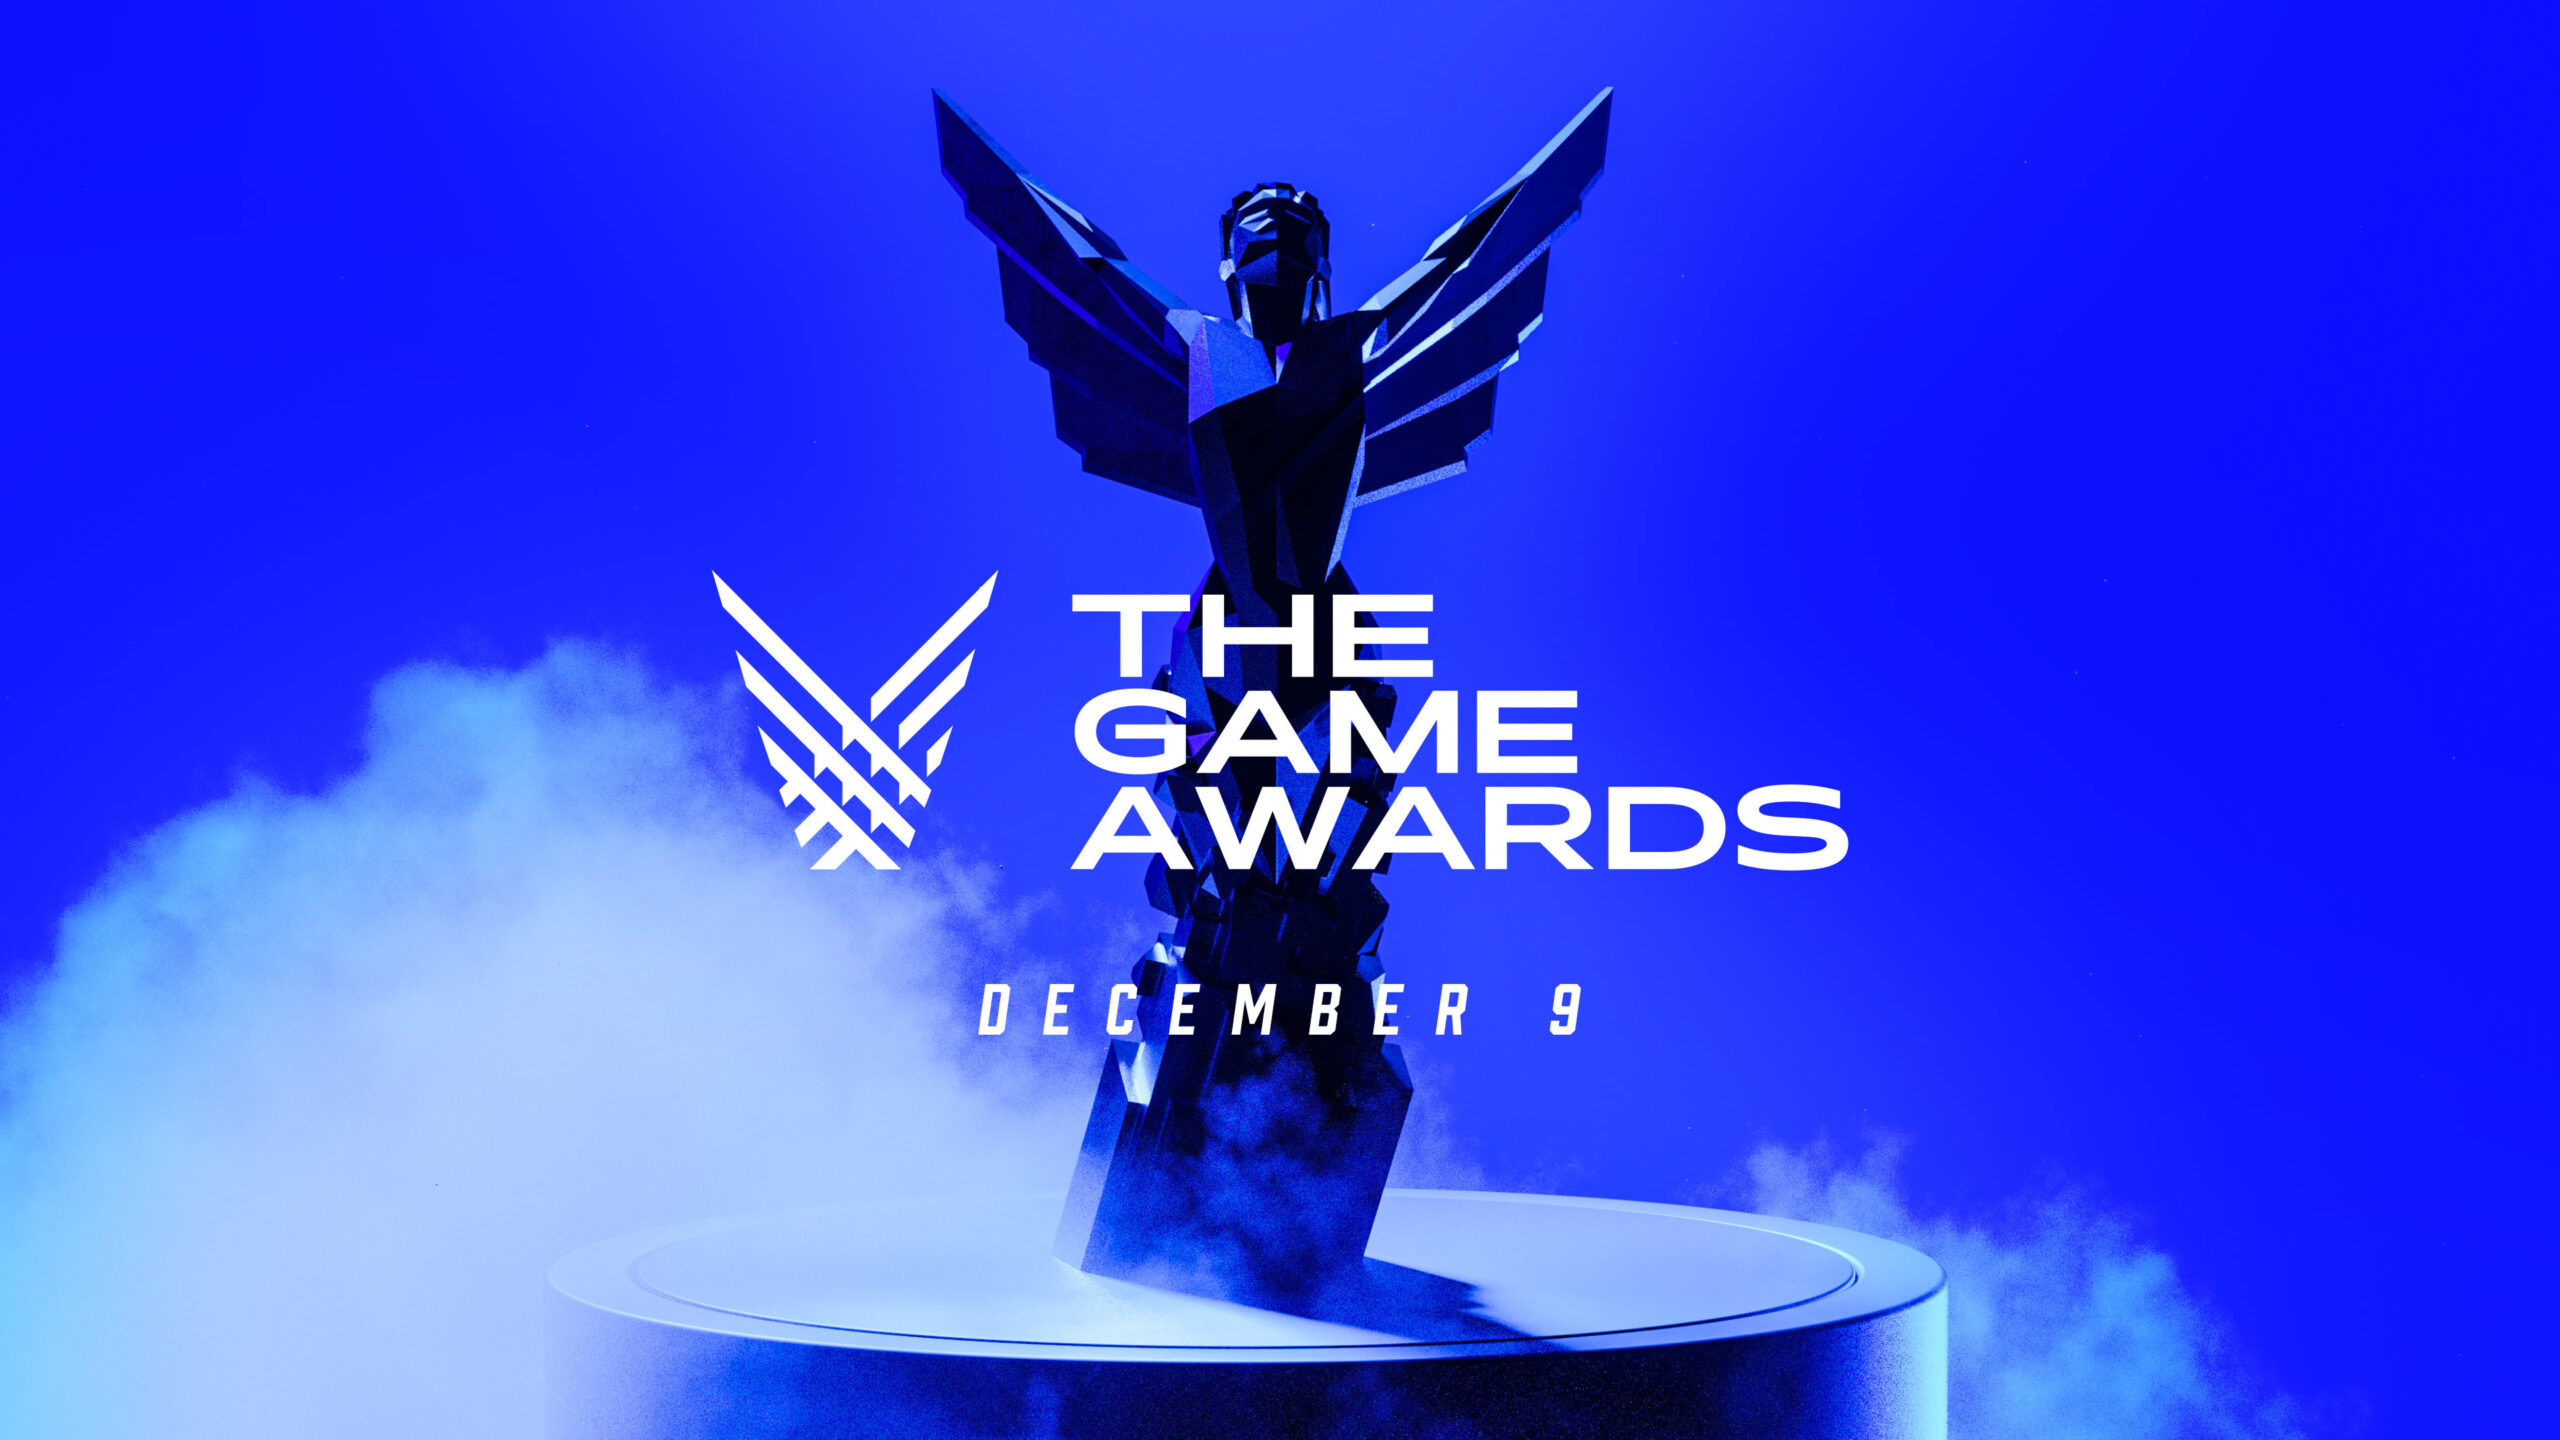 Ark 2 with Vin Diesel revealed at The Game Awards